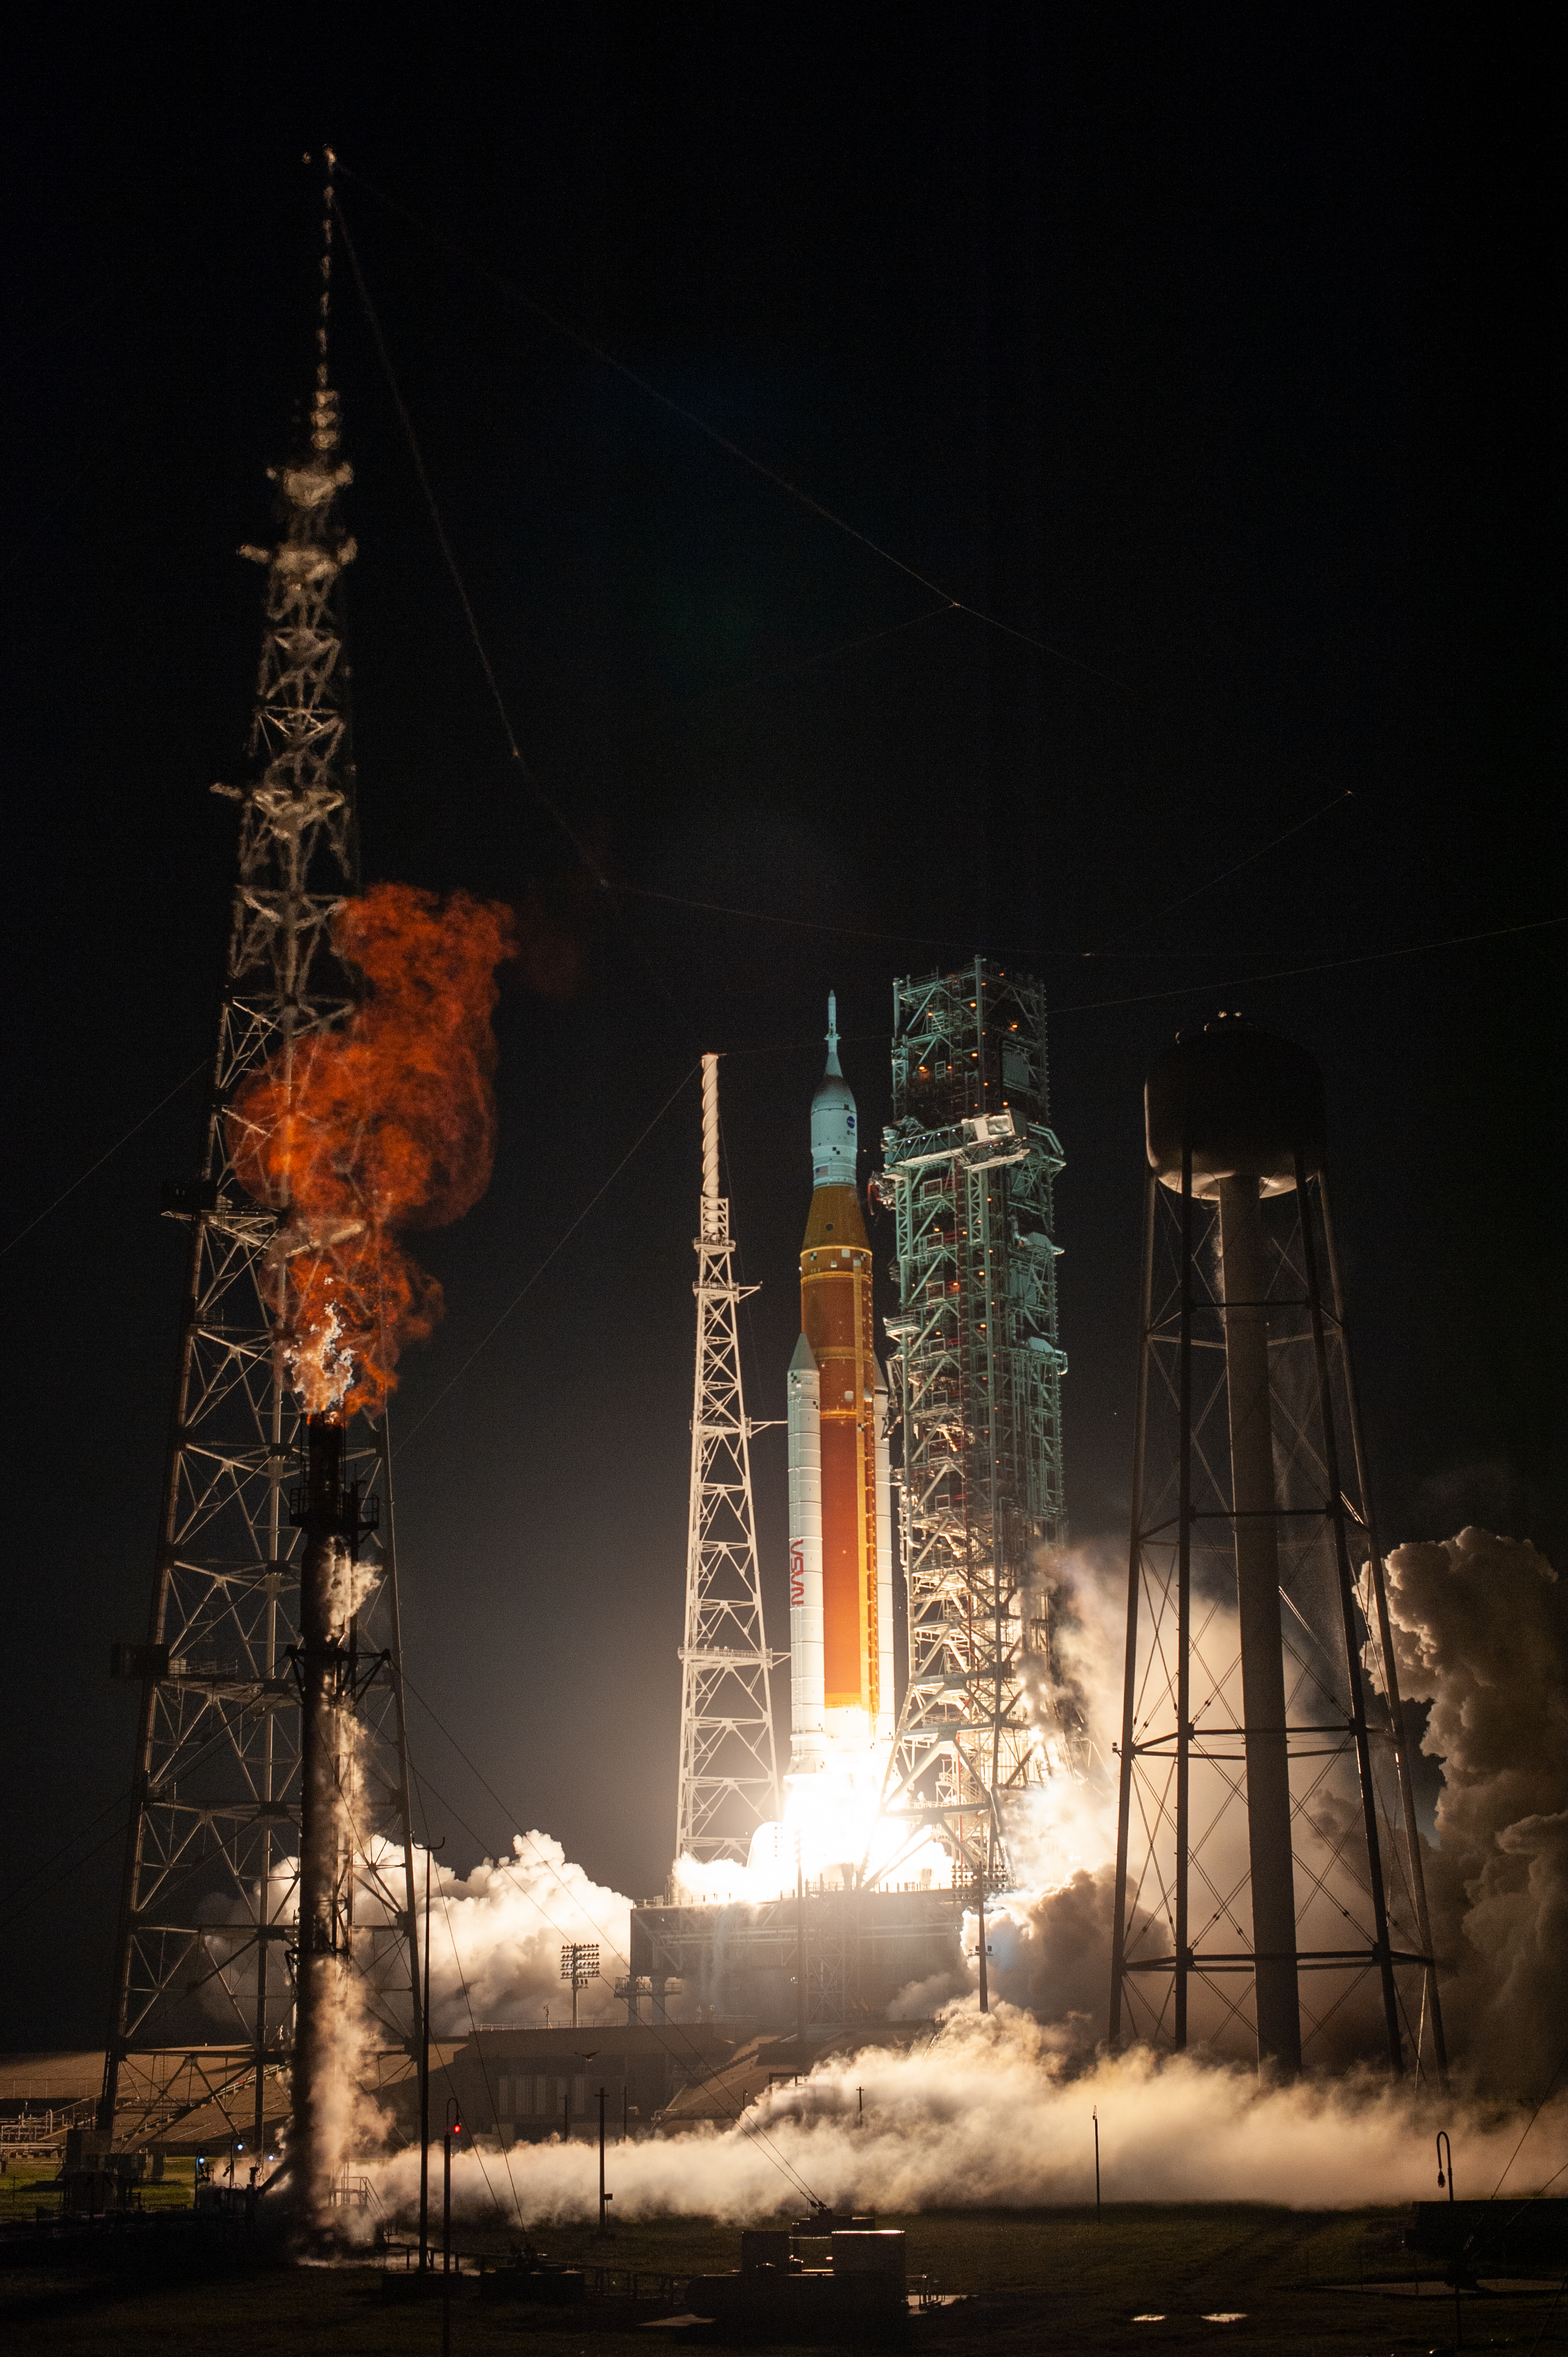 On This Day: Artemis I Liftoff